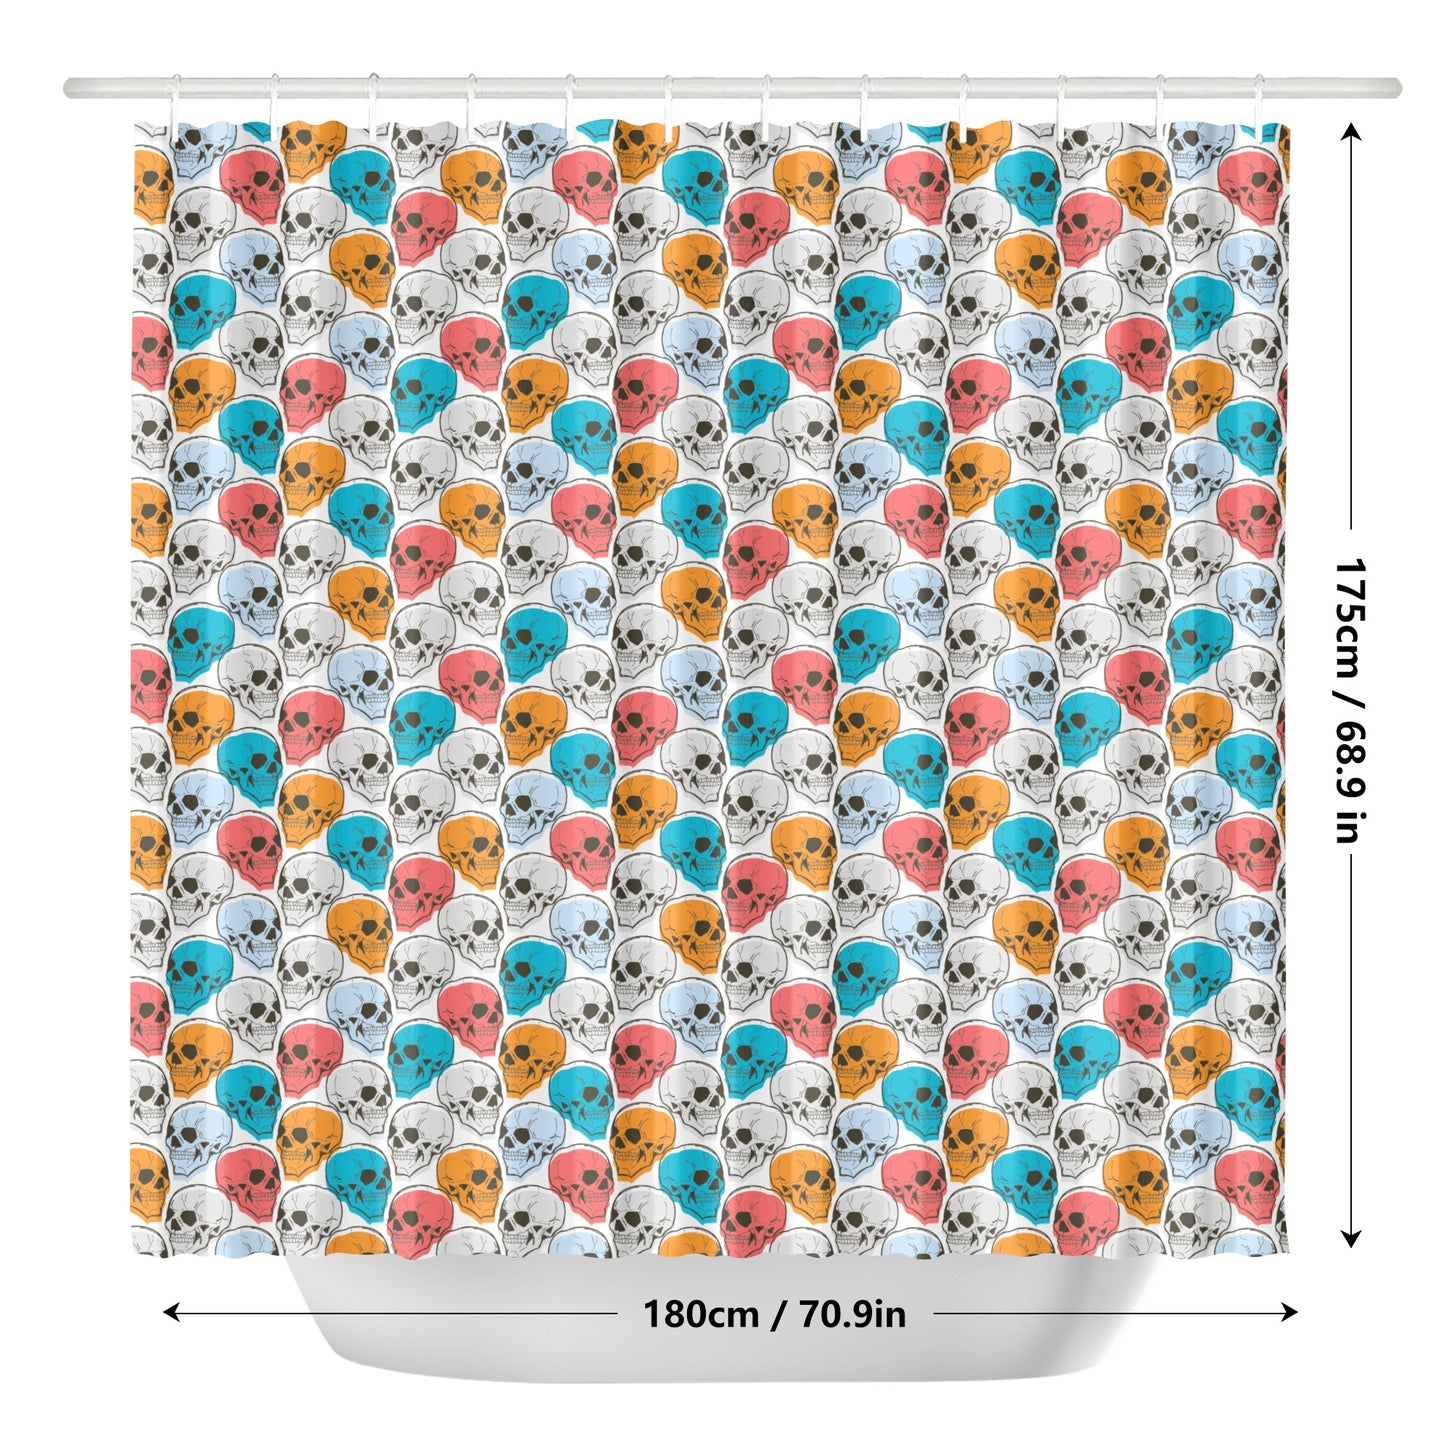 Colored Skull Heads Shower Curtain